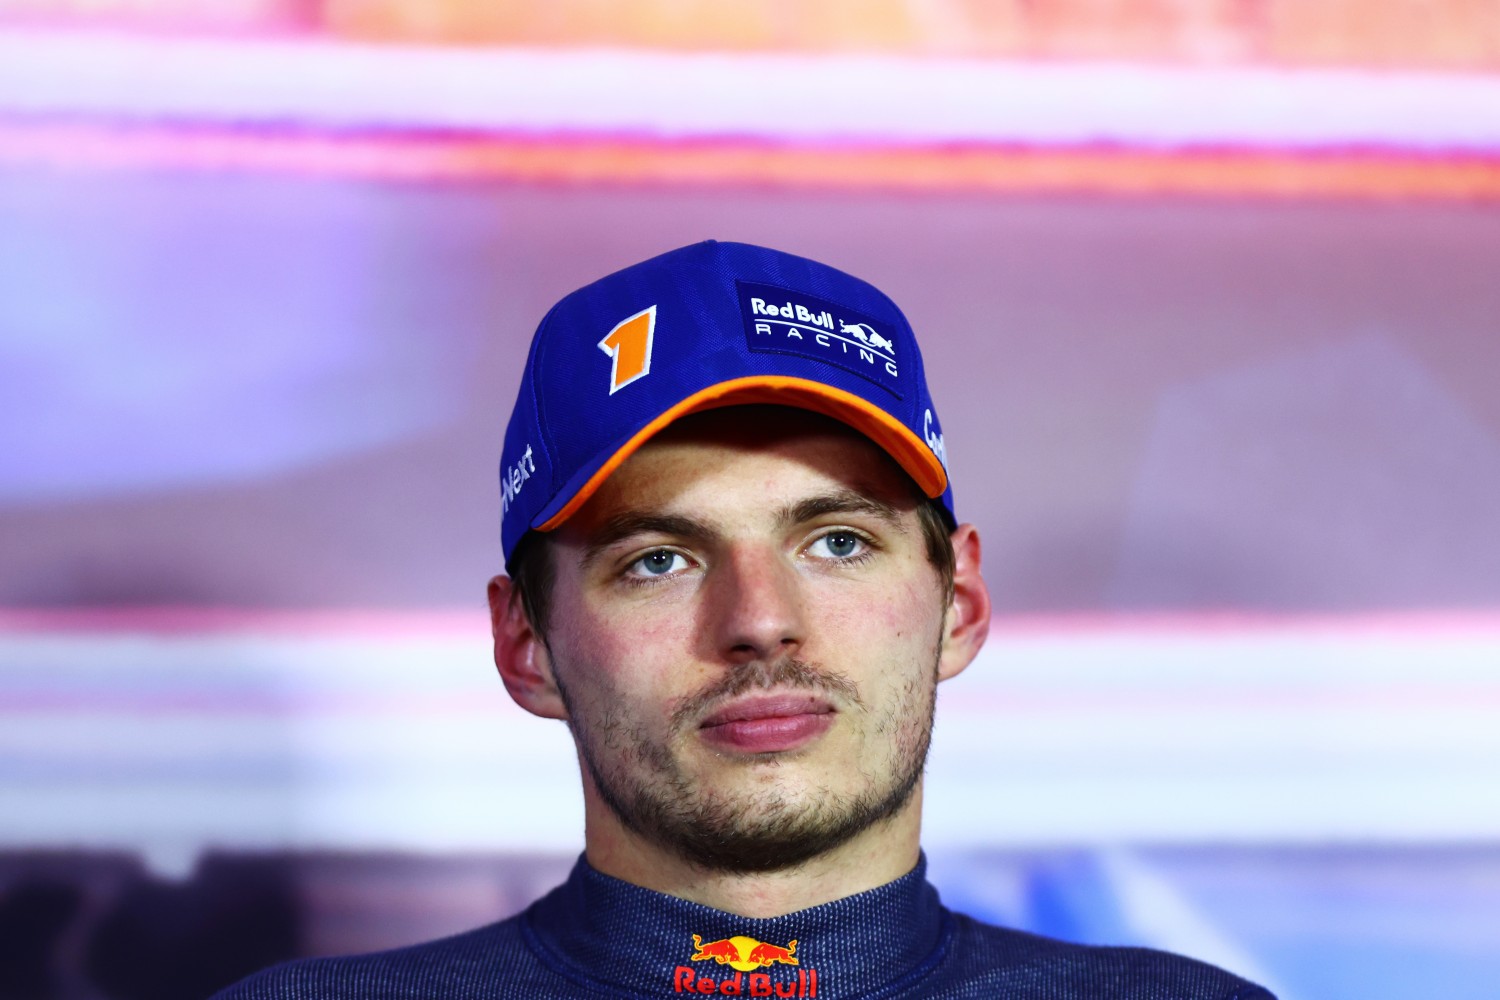 ole position qualifier Max Verstappen of the Netherlands and Oracle Red Bull Racing attends the press conference after qualifying ahead of the F1 Grand Prix of The Netherlands at Circuit Zandvoort on September 03, 2022 in Zandvoort, Netherlands. (Photo by Dan Istitene/Getty Images)